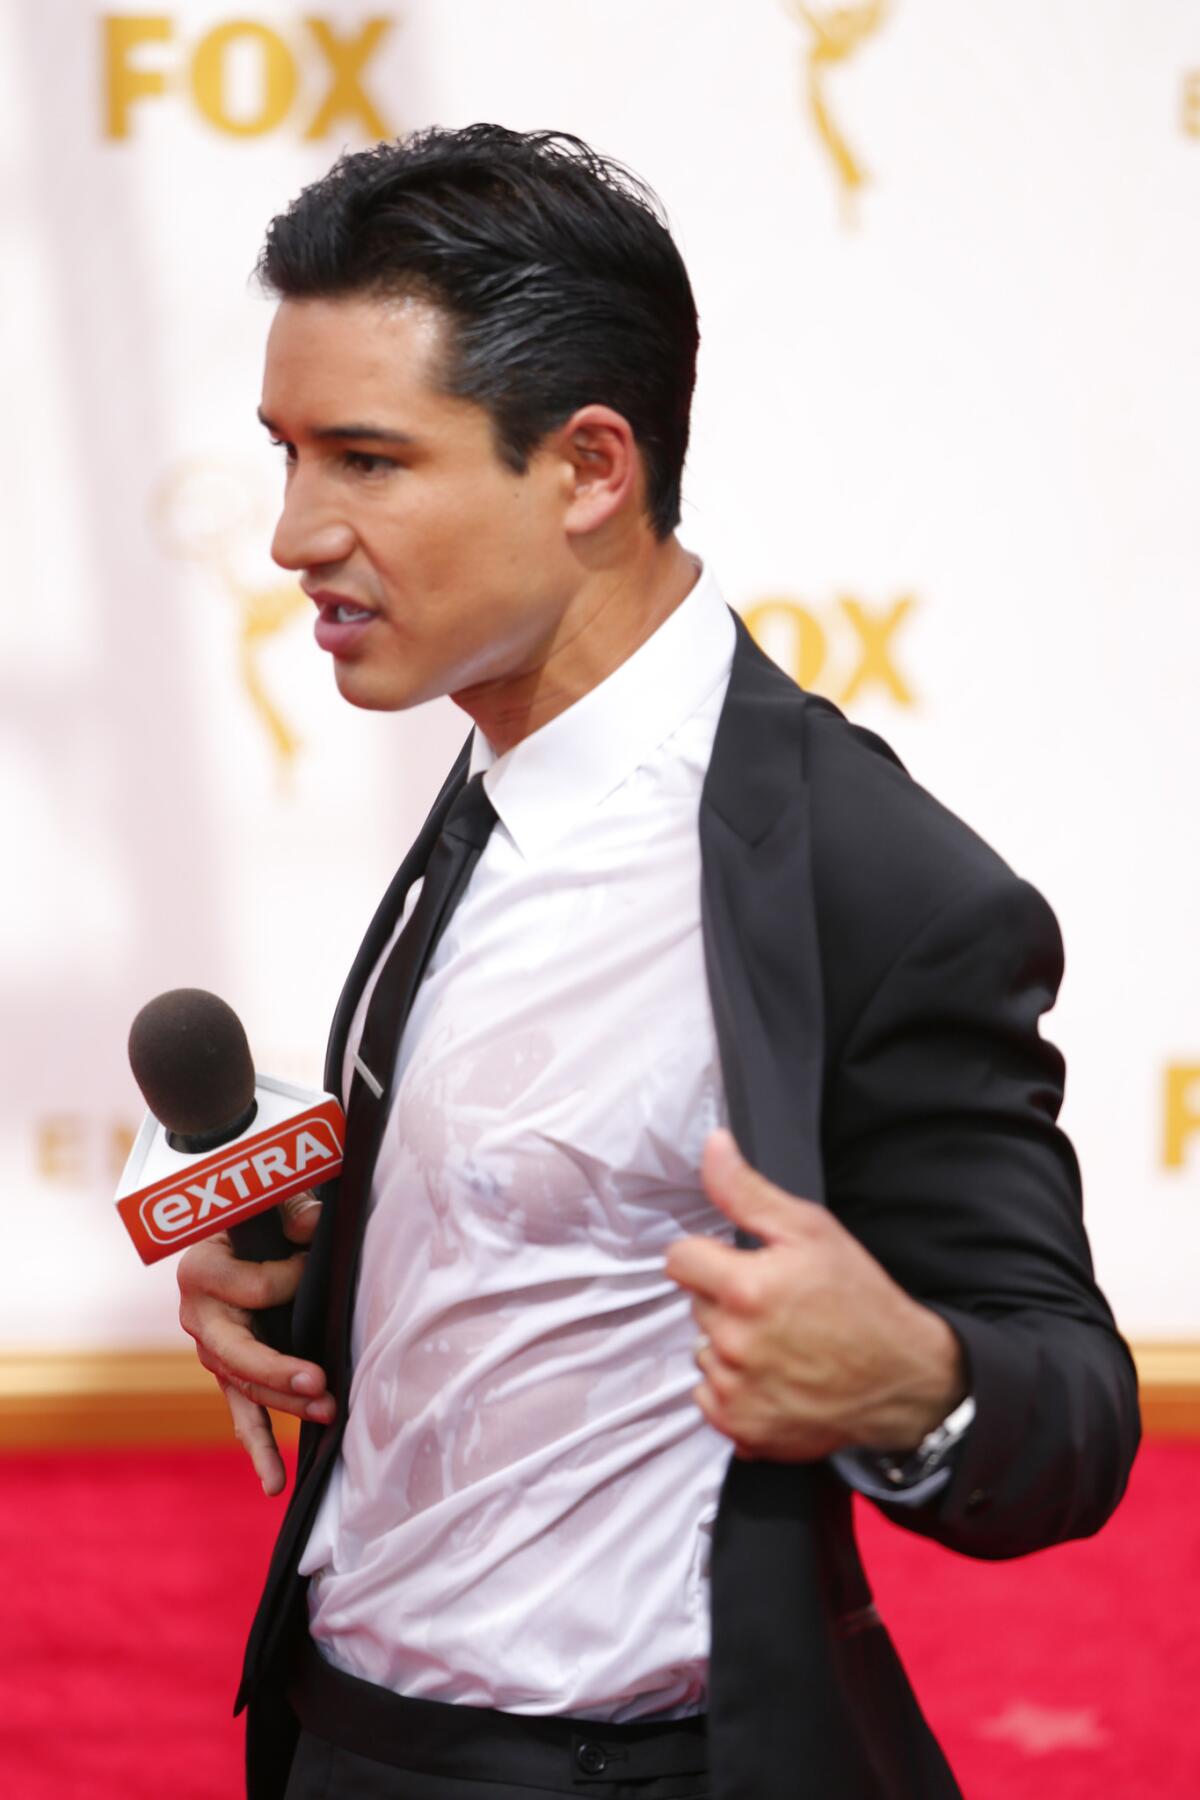 Mario Lopez shows off his drenched shirt on the red carpet prior to the 67h Annual Primetime Emmy Awards.